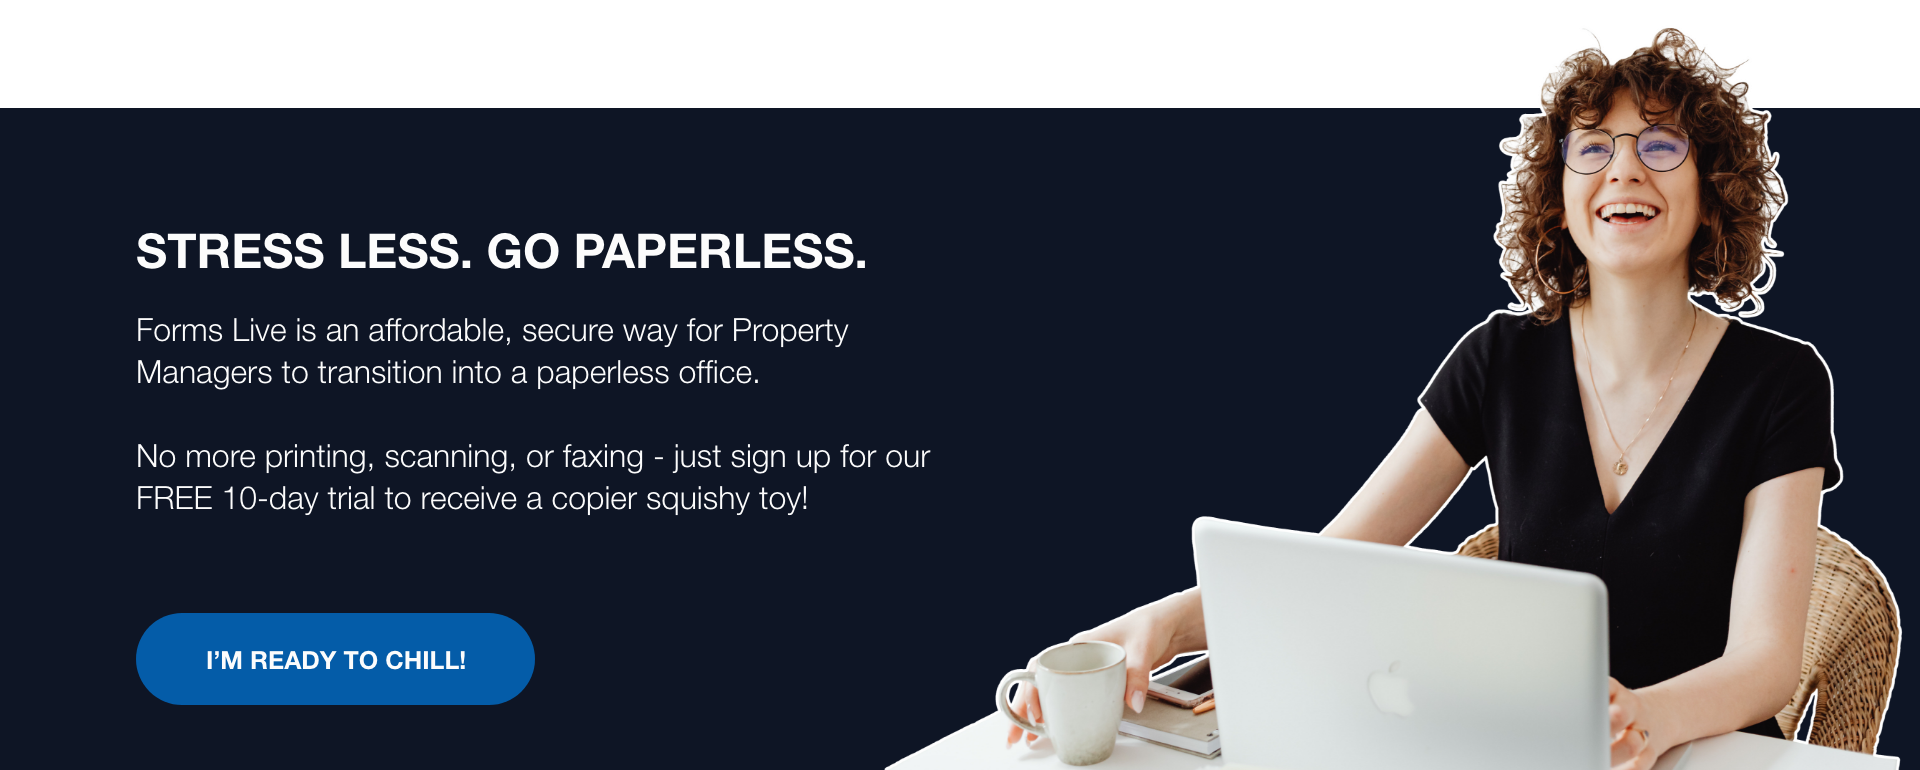 Copier getting the best of you? Don’t stress. Go paperless.